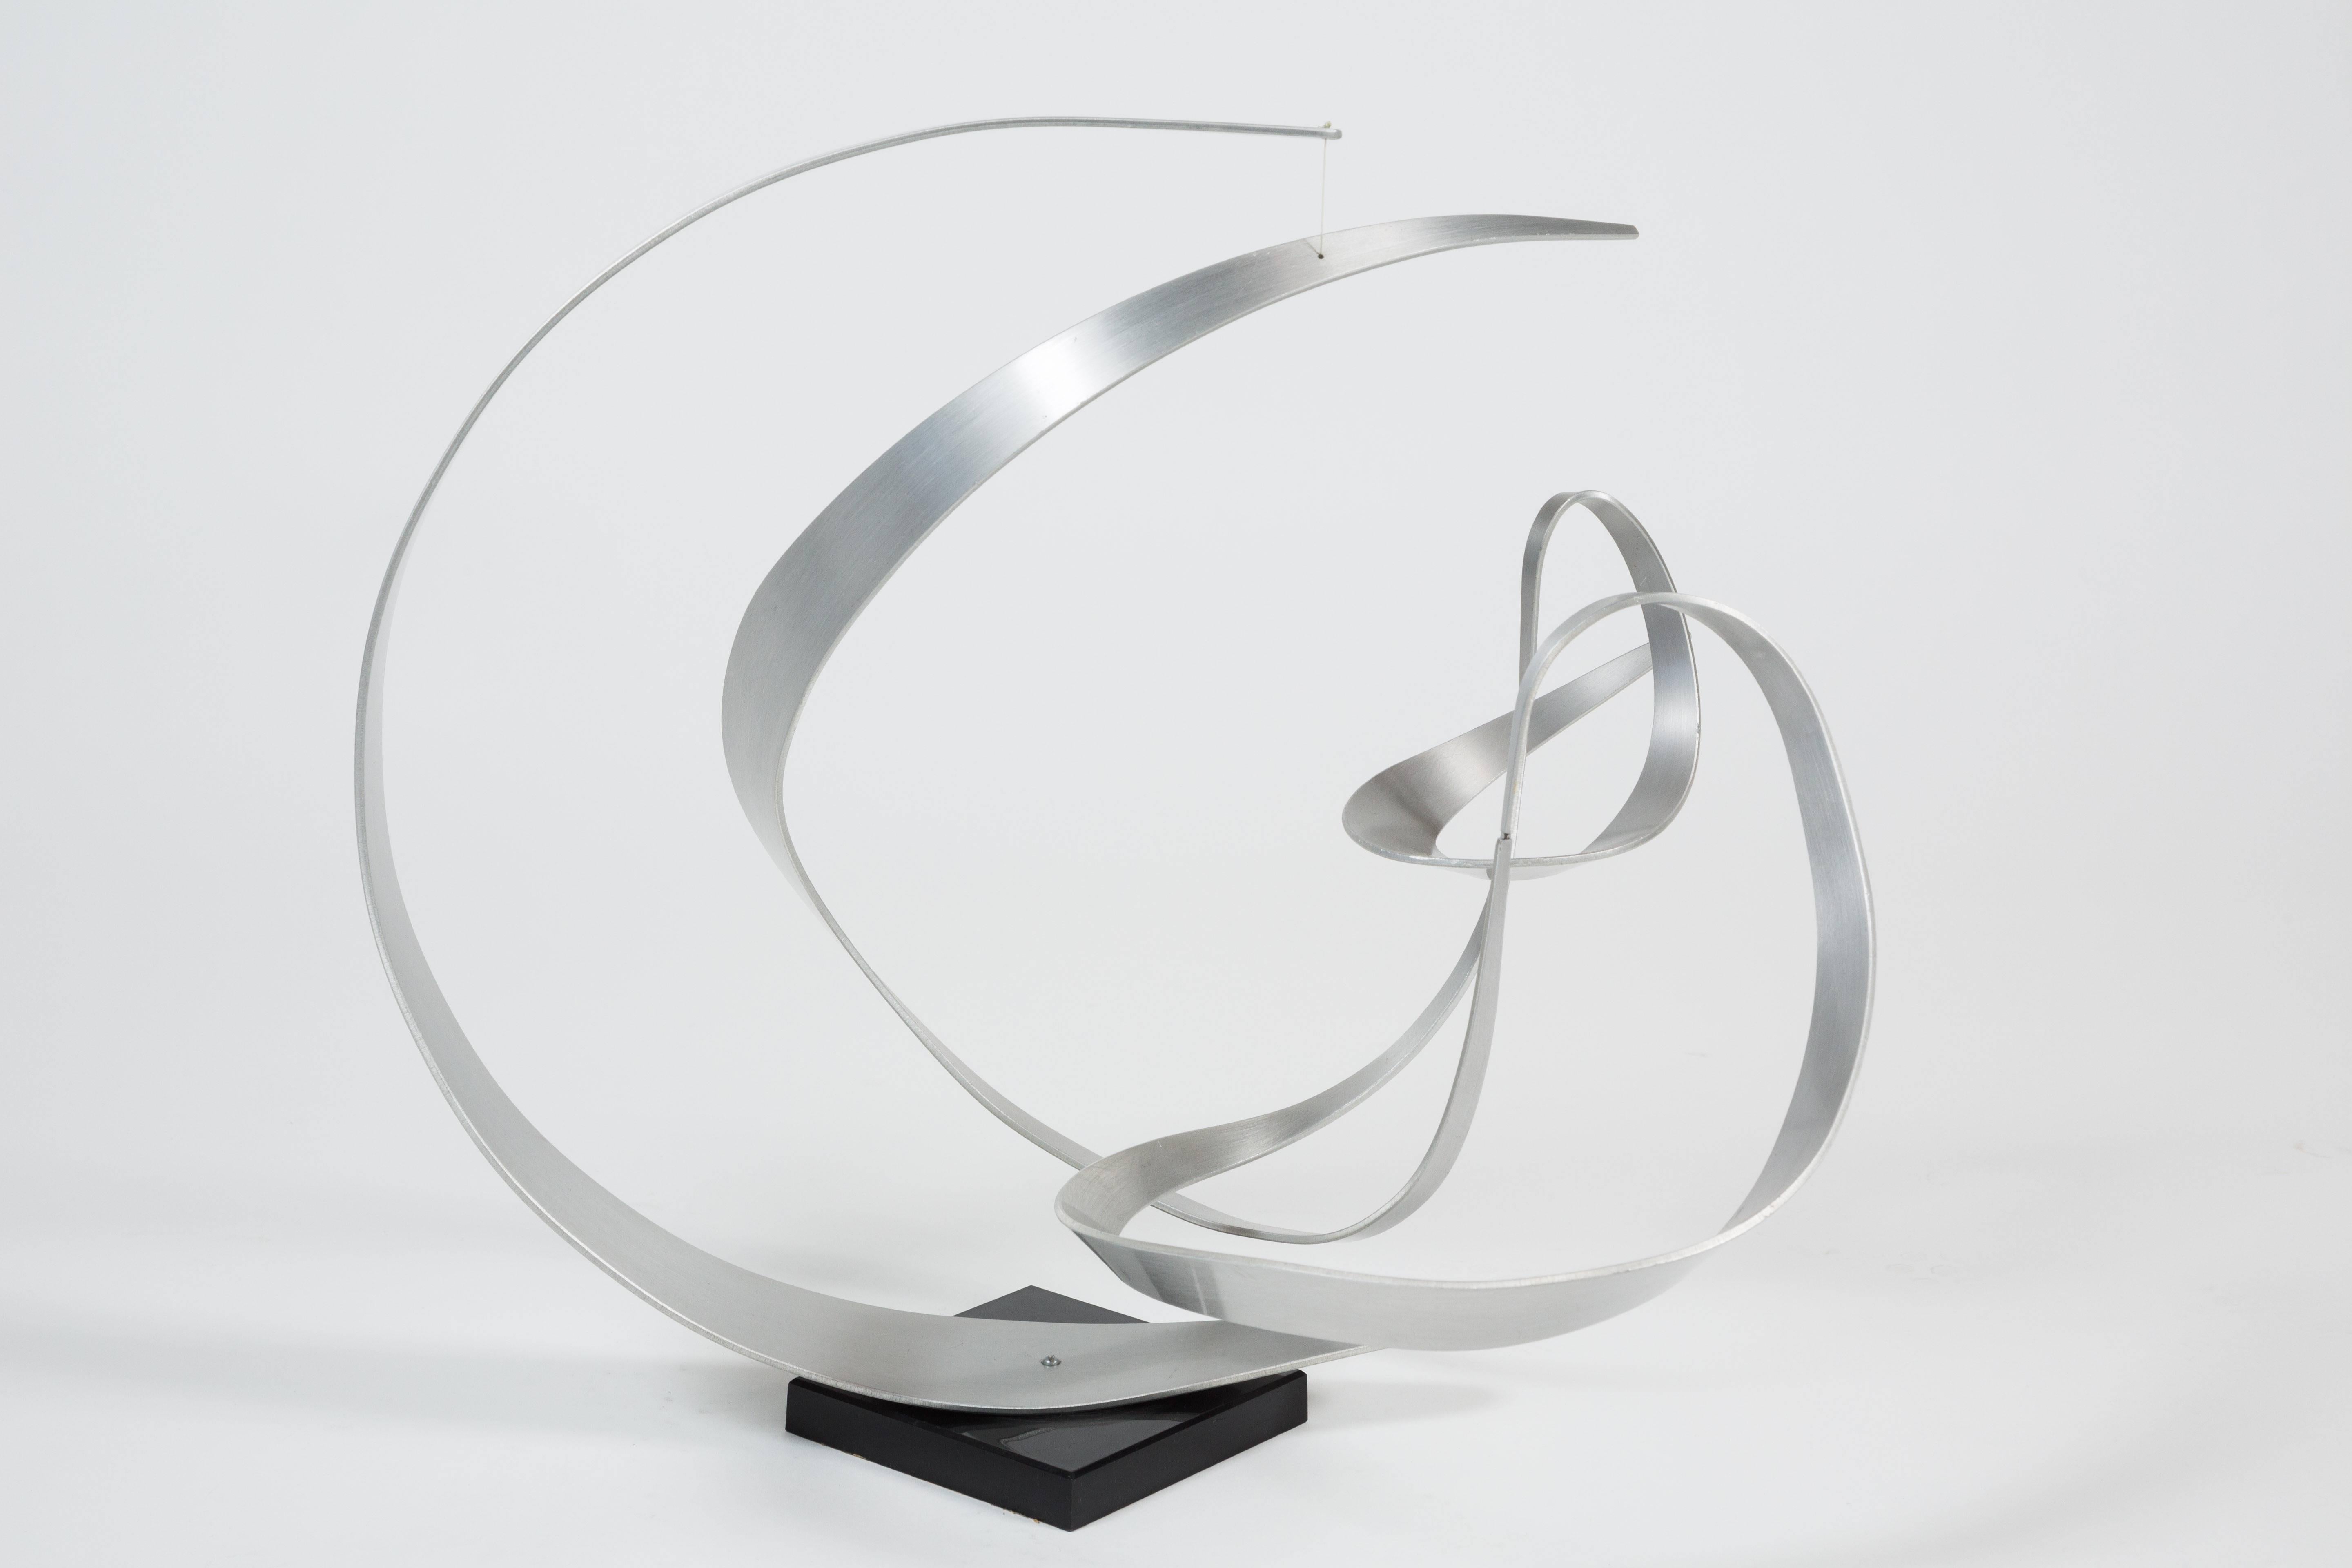 American Striking Kinetic Abstract Sculpture by John W. Anderson